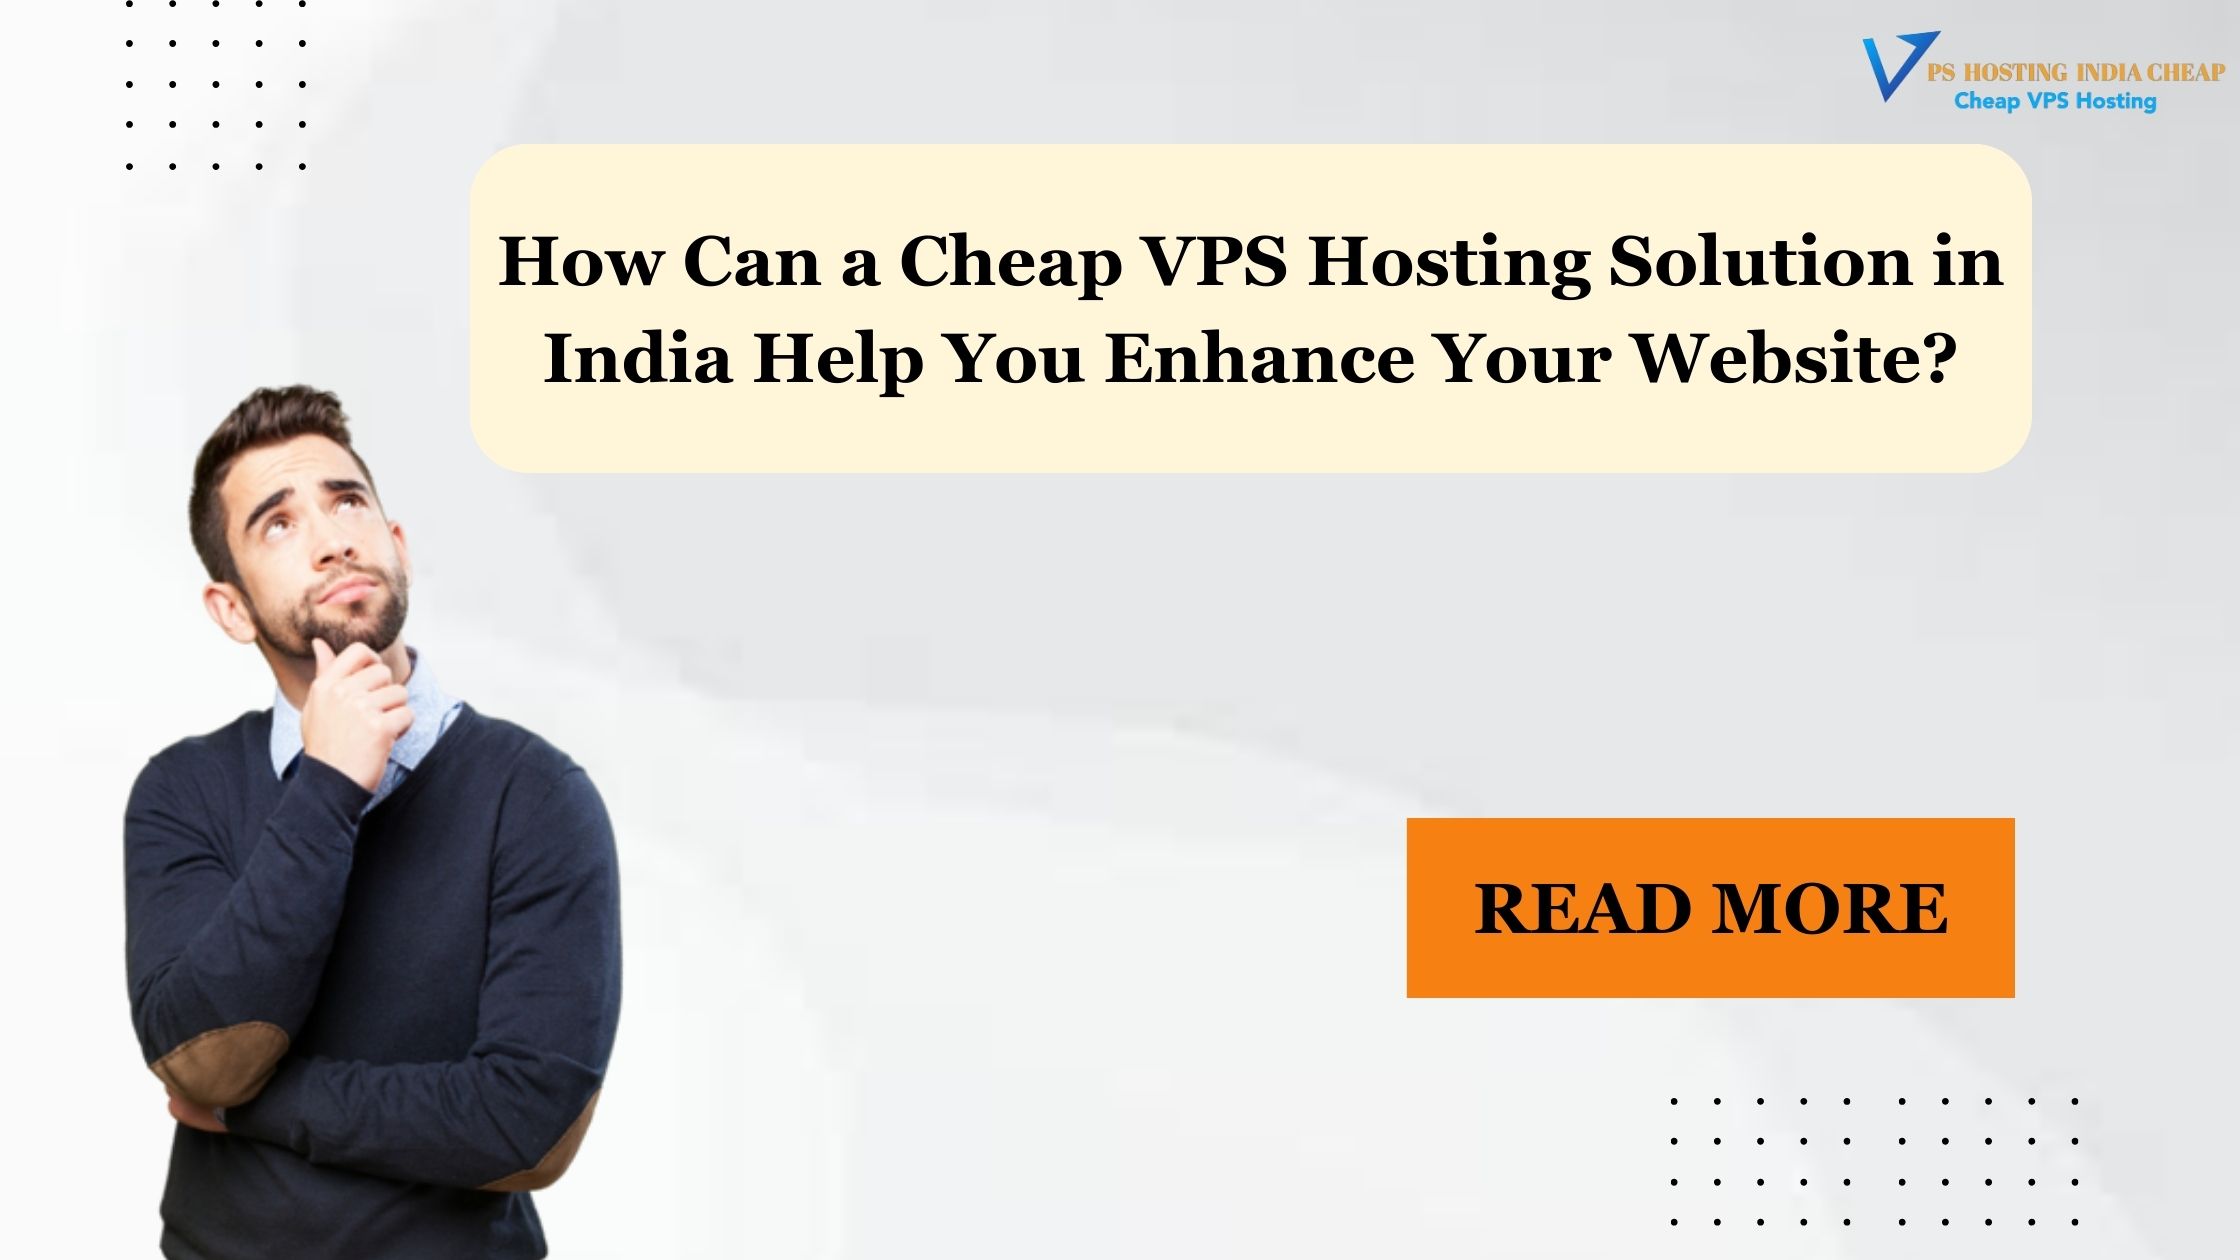 How Can a Cheap VPS Hosting Solution in India Help You Enhance Your Website?